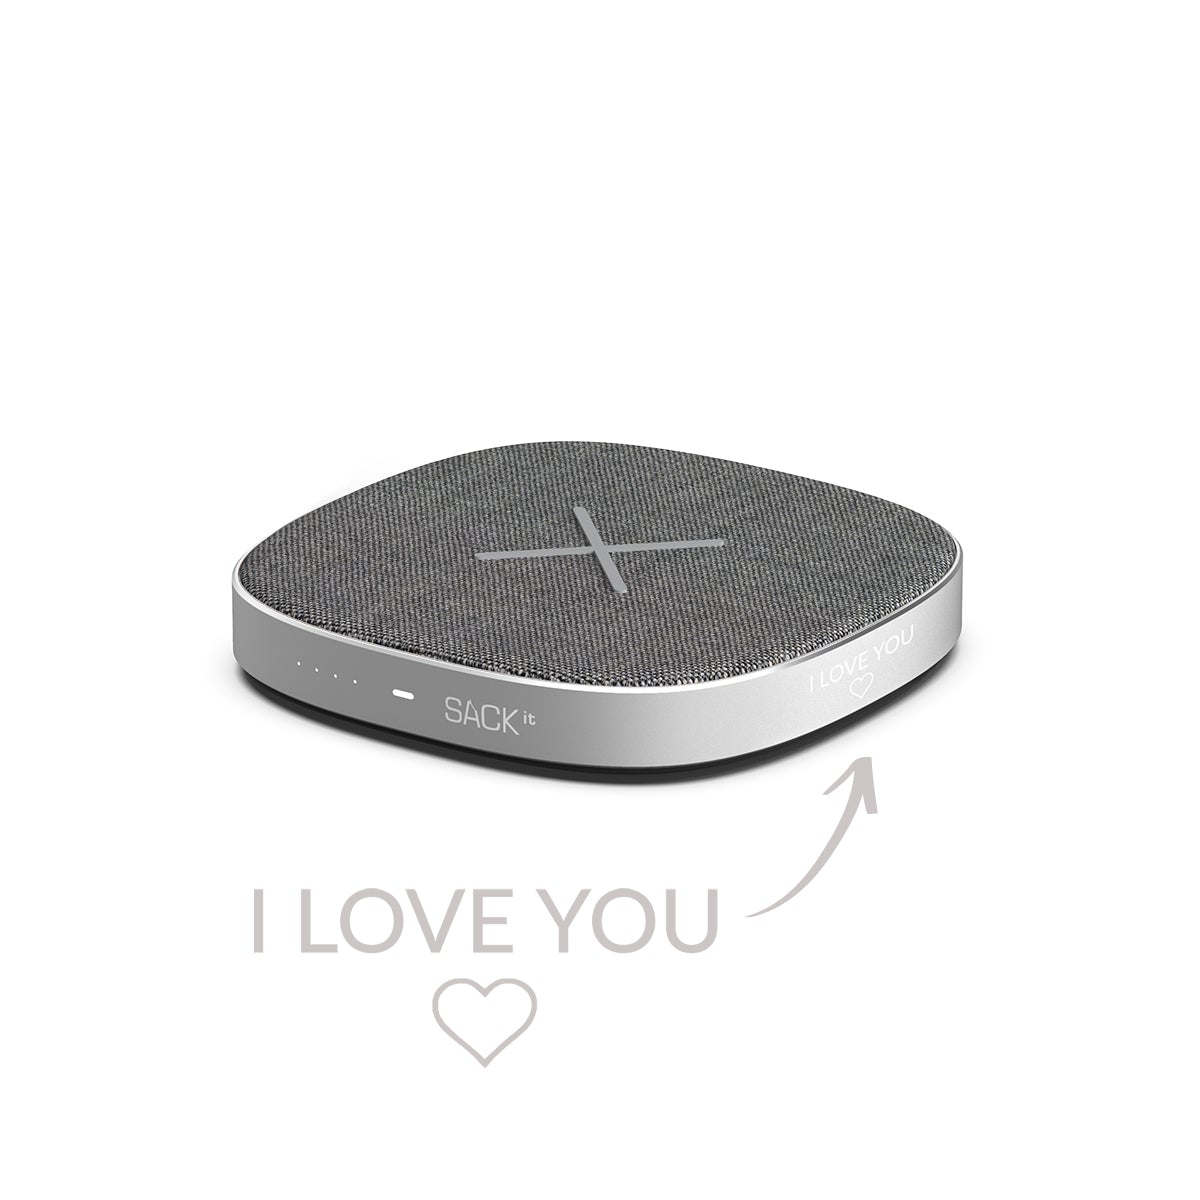 Chargeit "I Love You"